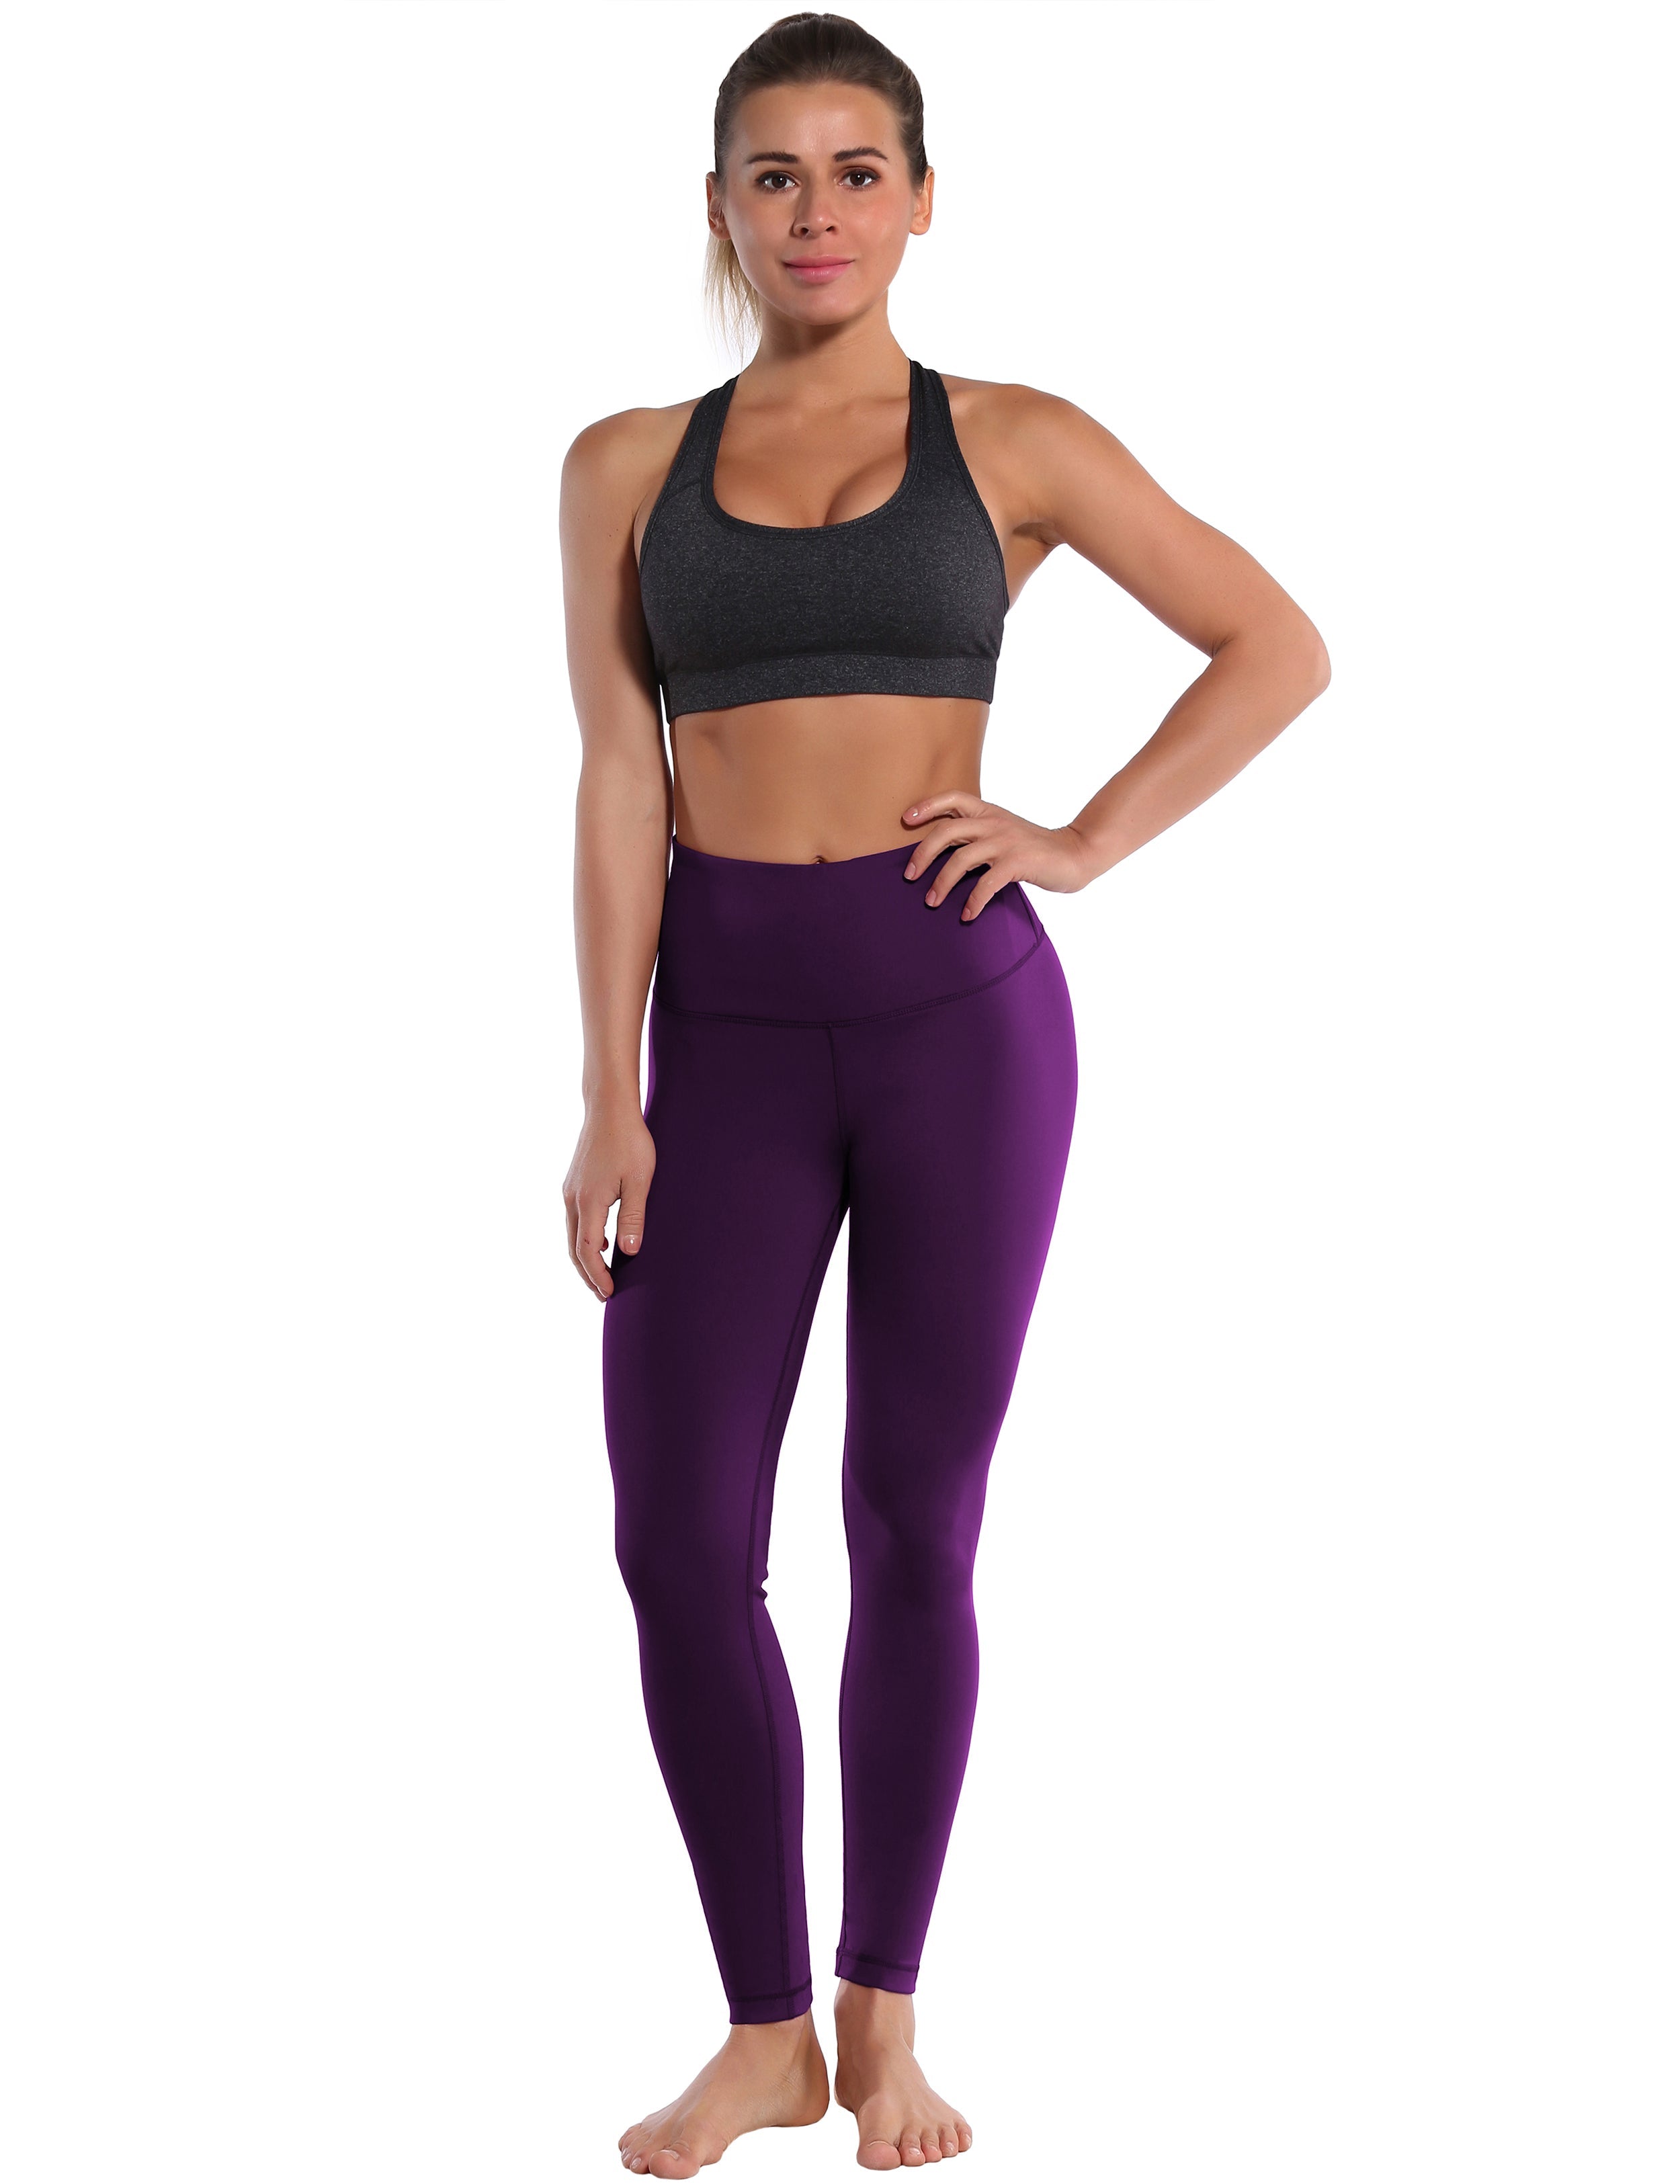 High Waist Jogging Pants plum 75%Nylon/25%Spandex Fabric doesn't attract lint easily 4-way stretch No see-through Moisture-wicking Tummy control Inner pocket Four lengths